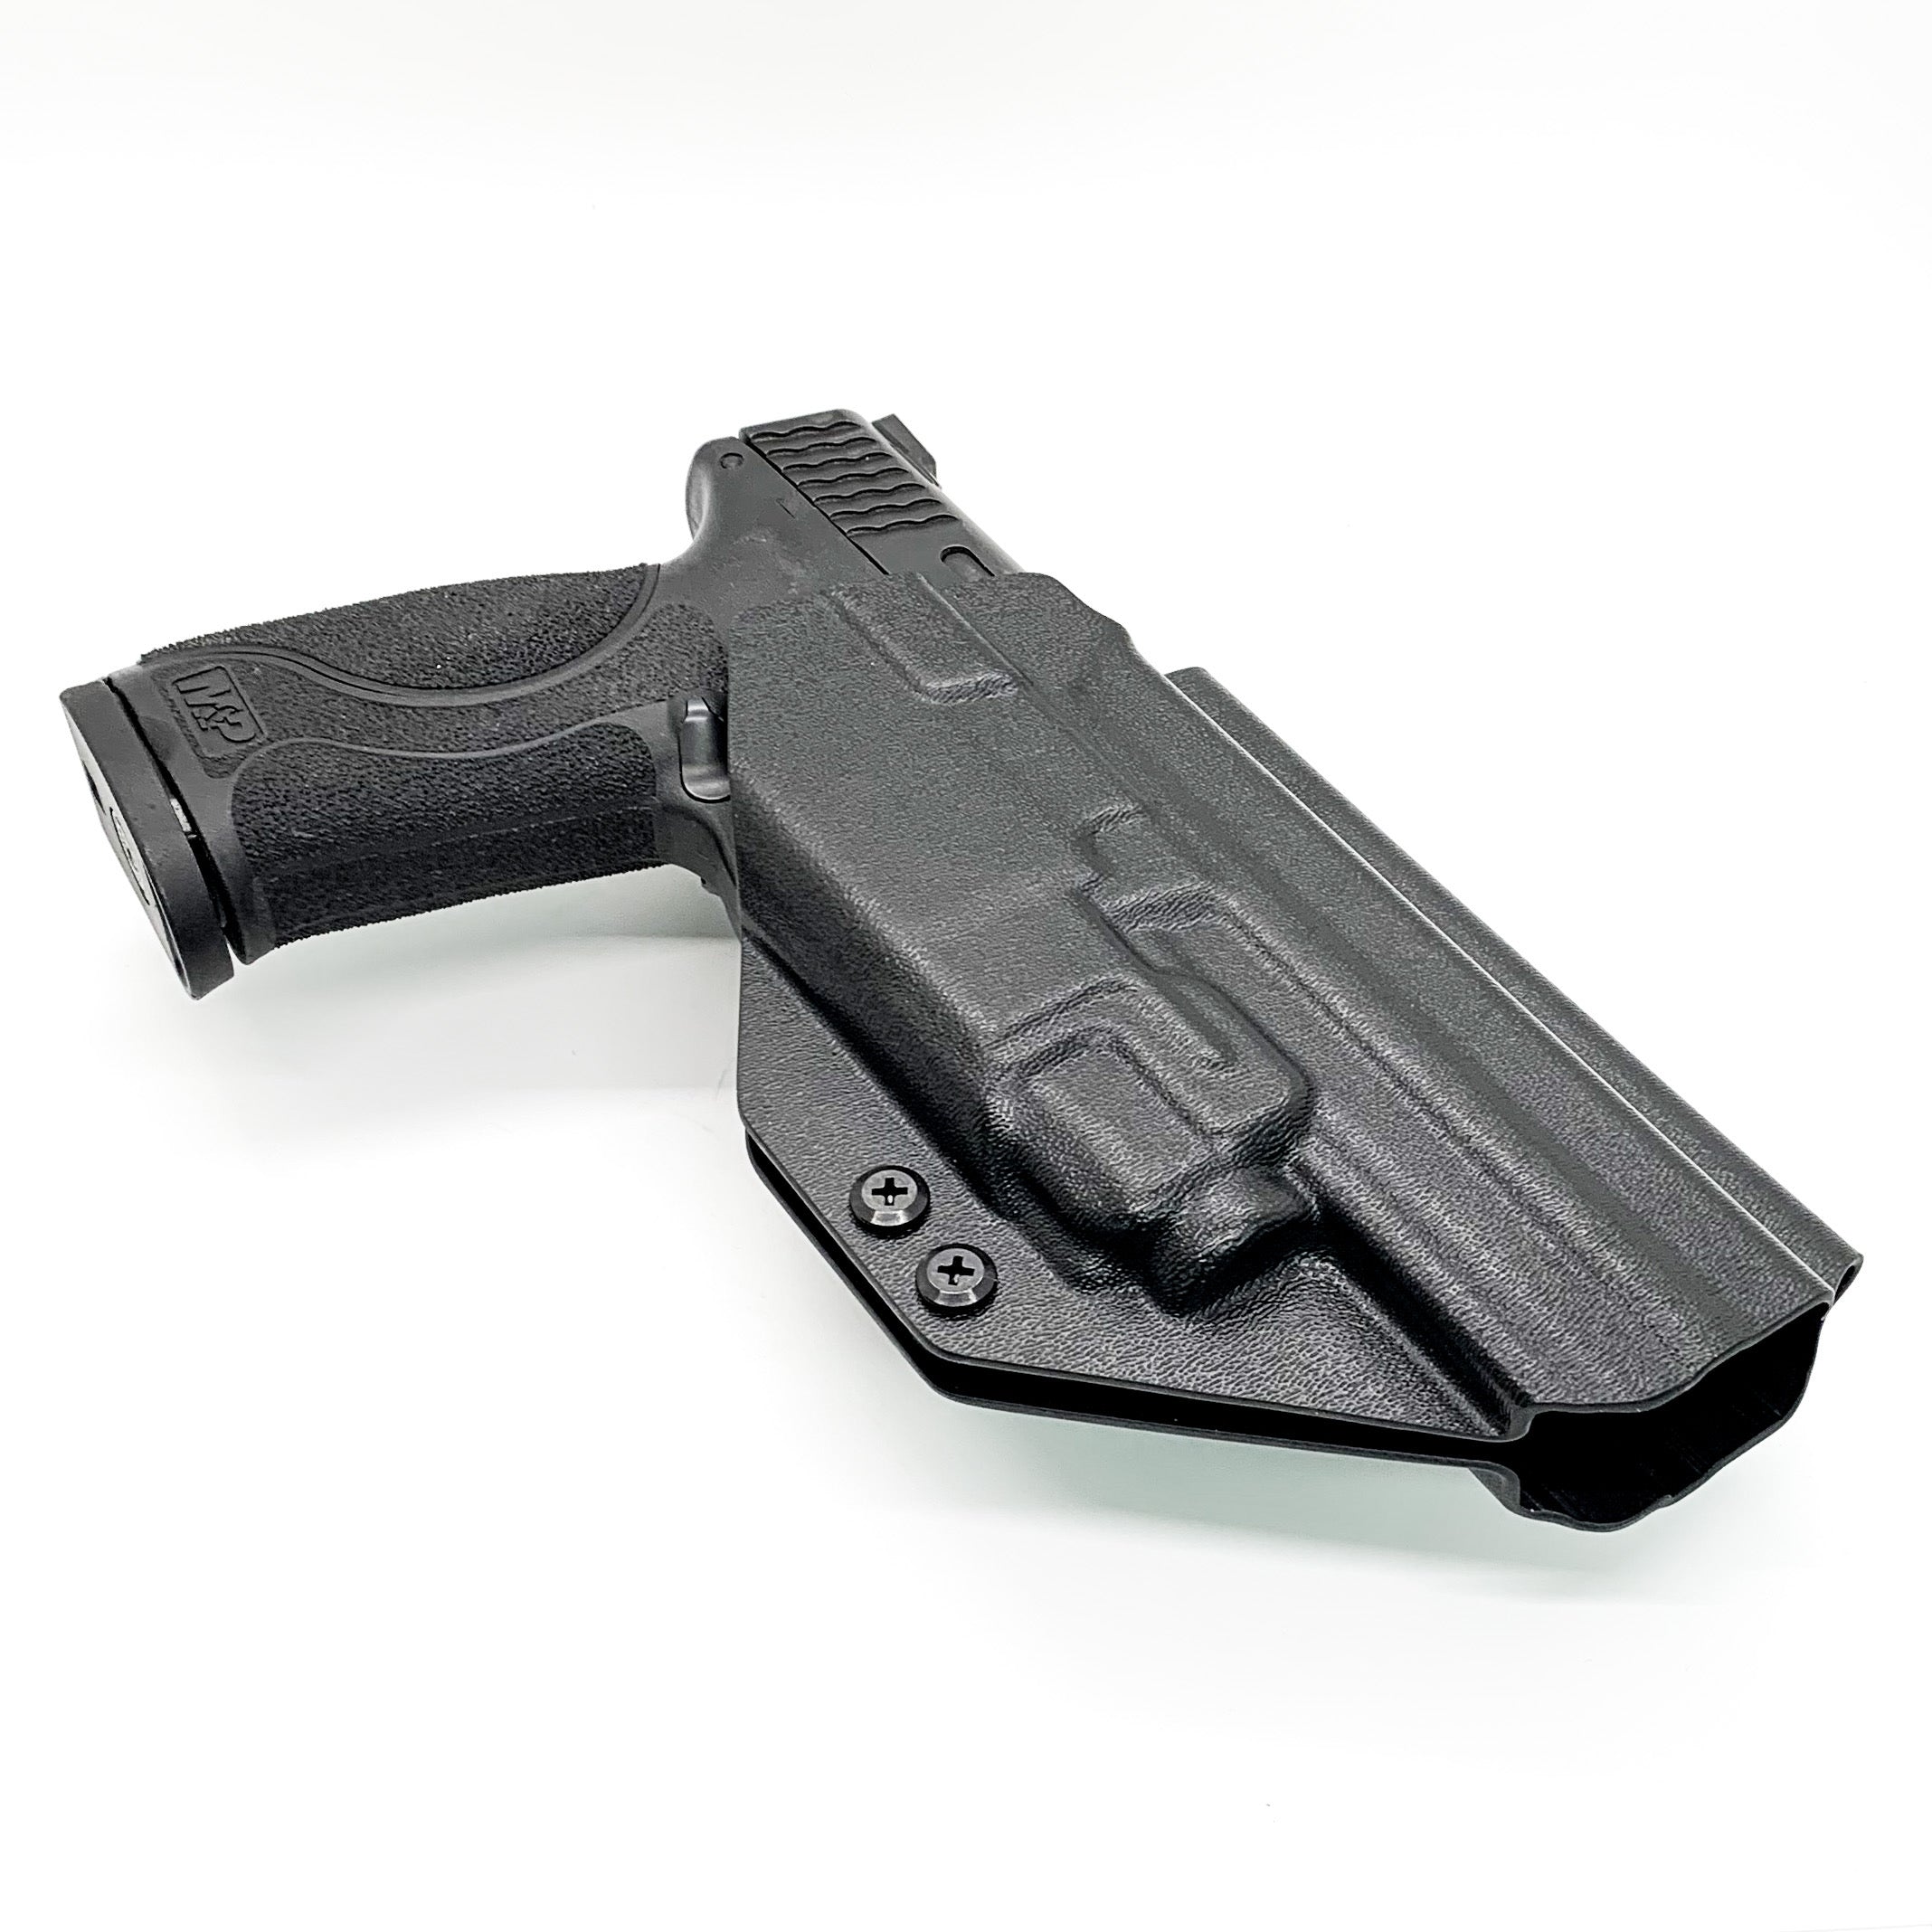 For the best, Outside Waistband OWB Kydex Holster designed to fit the Smith & Wesson M&P 10mm 5.6" Performance Center M2.0 pistol with thumb safety & TLR-8A handgun, shop Four Brothers Holsters.  Full sweat guard, adjustable retention. Made in USA Open muzzle for threaded barrels, cleared for red dot sights.  